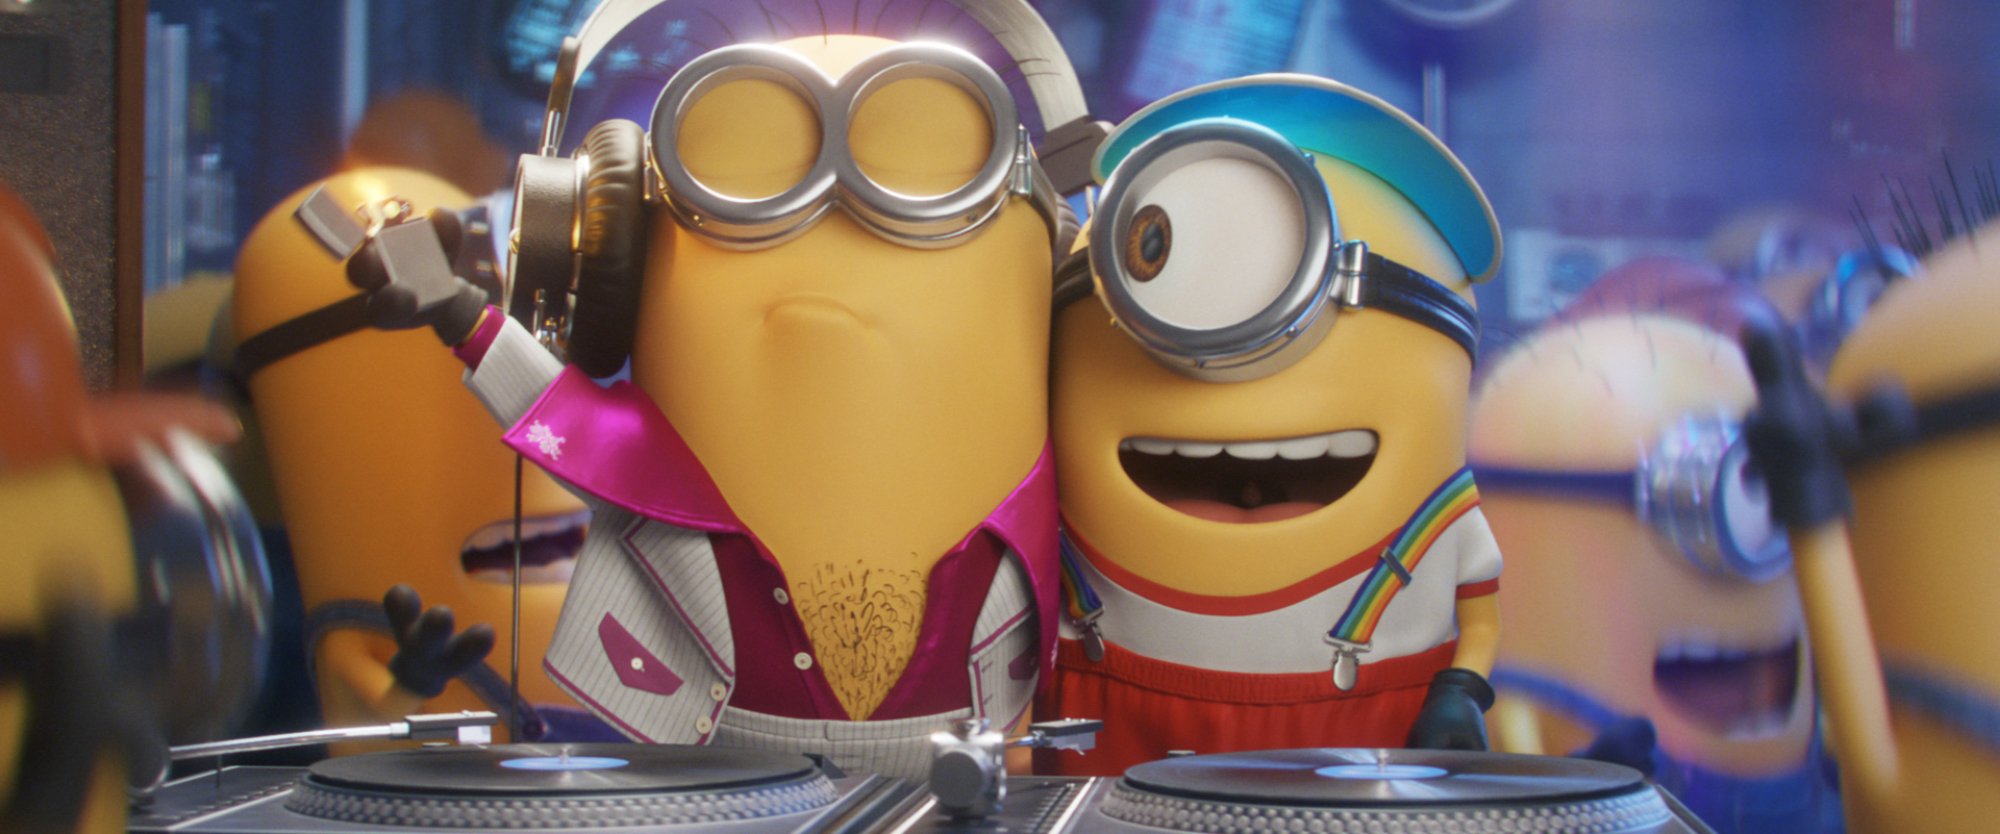 Despicable Me' vs. 'Toy Story': Which Animated Series Is More Popular?